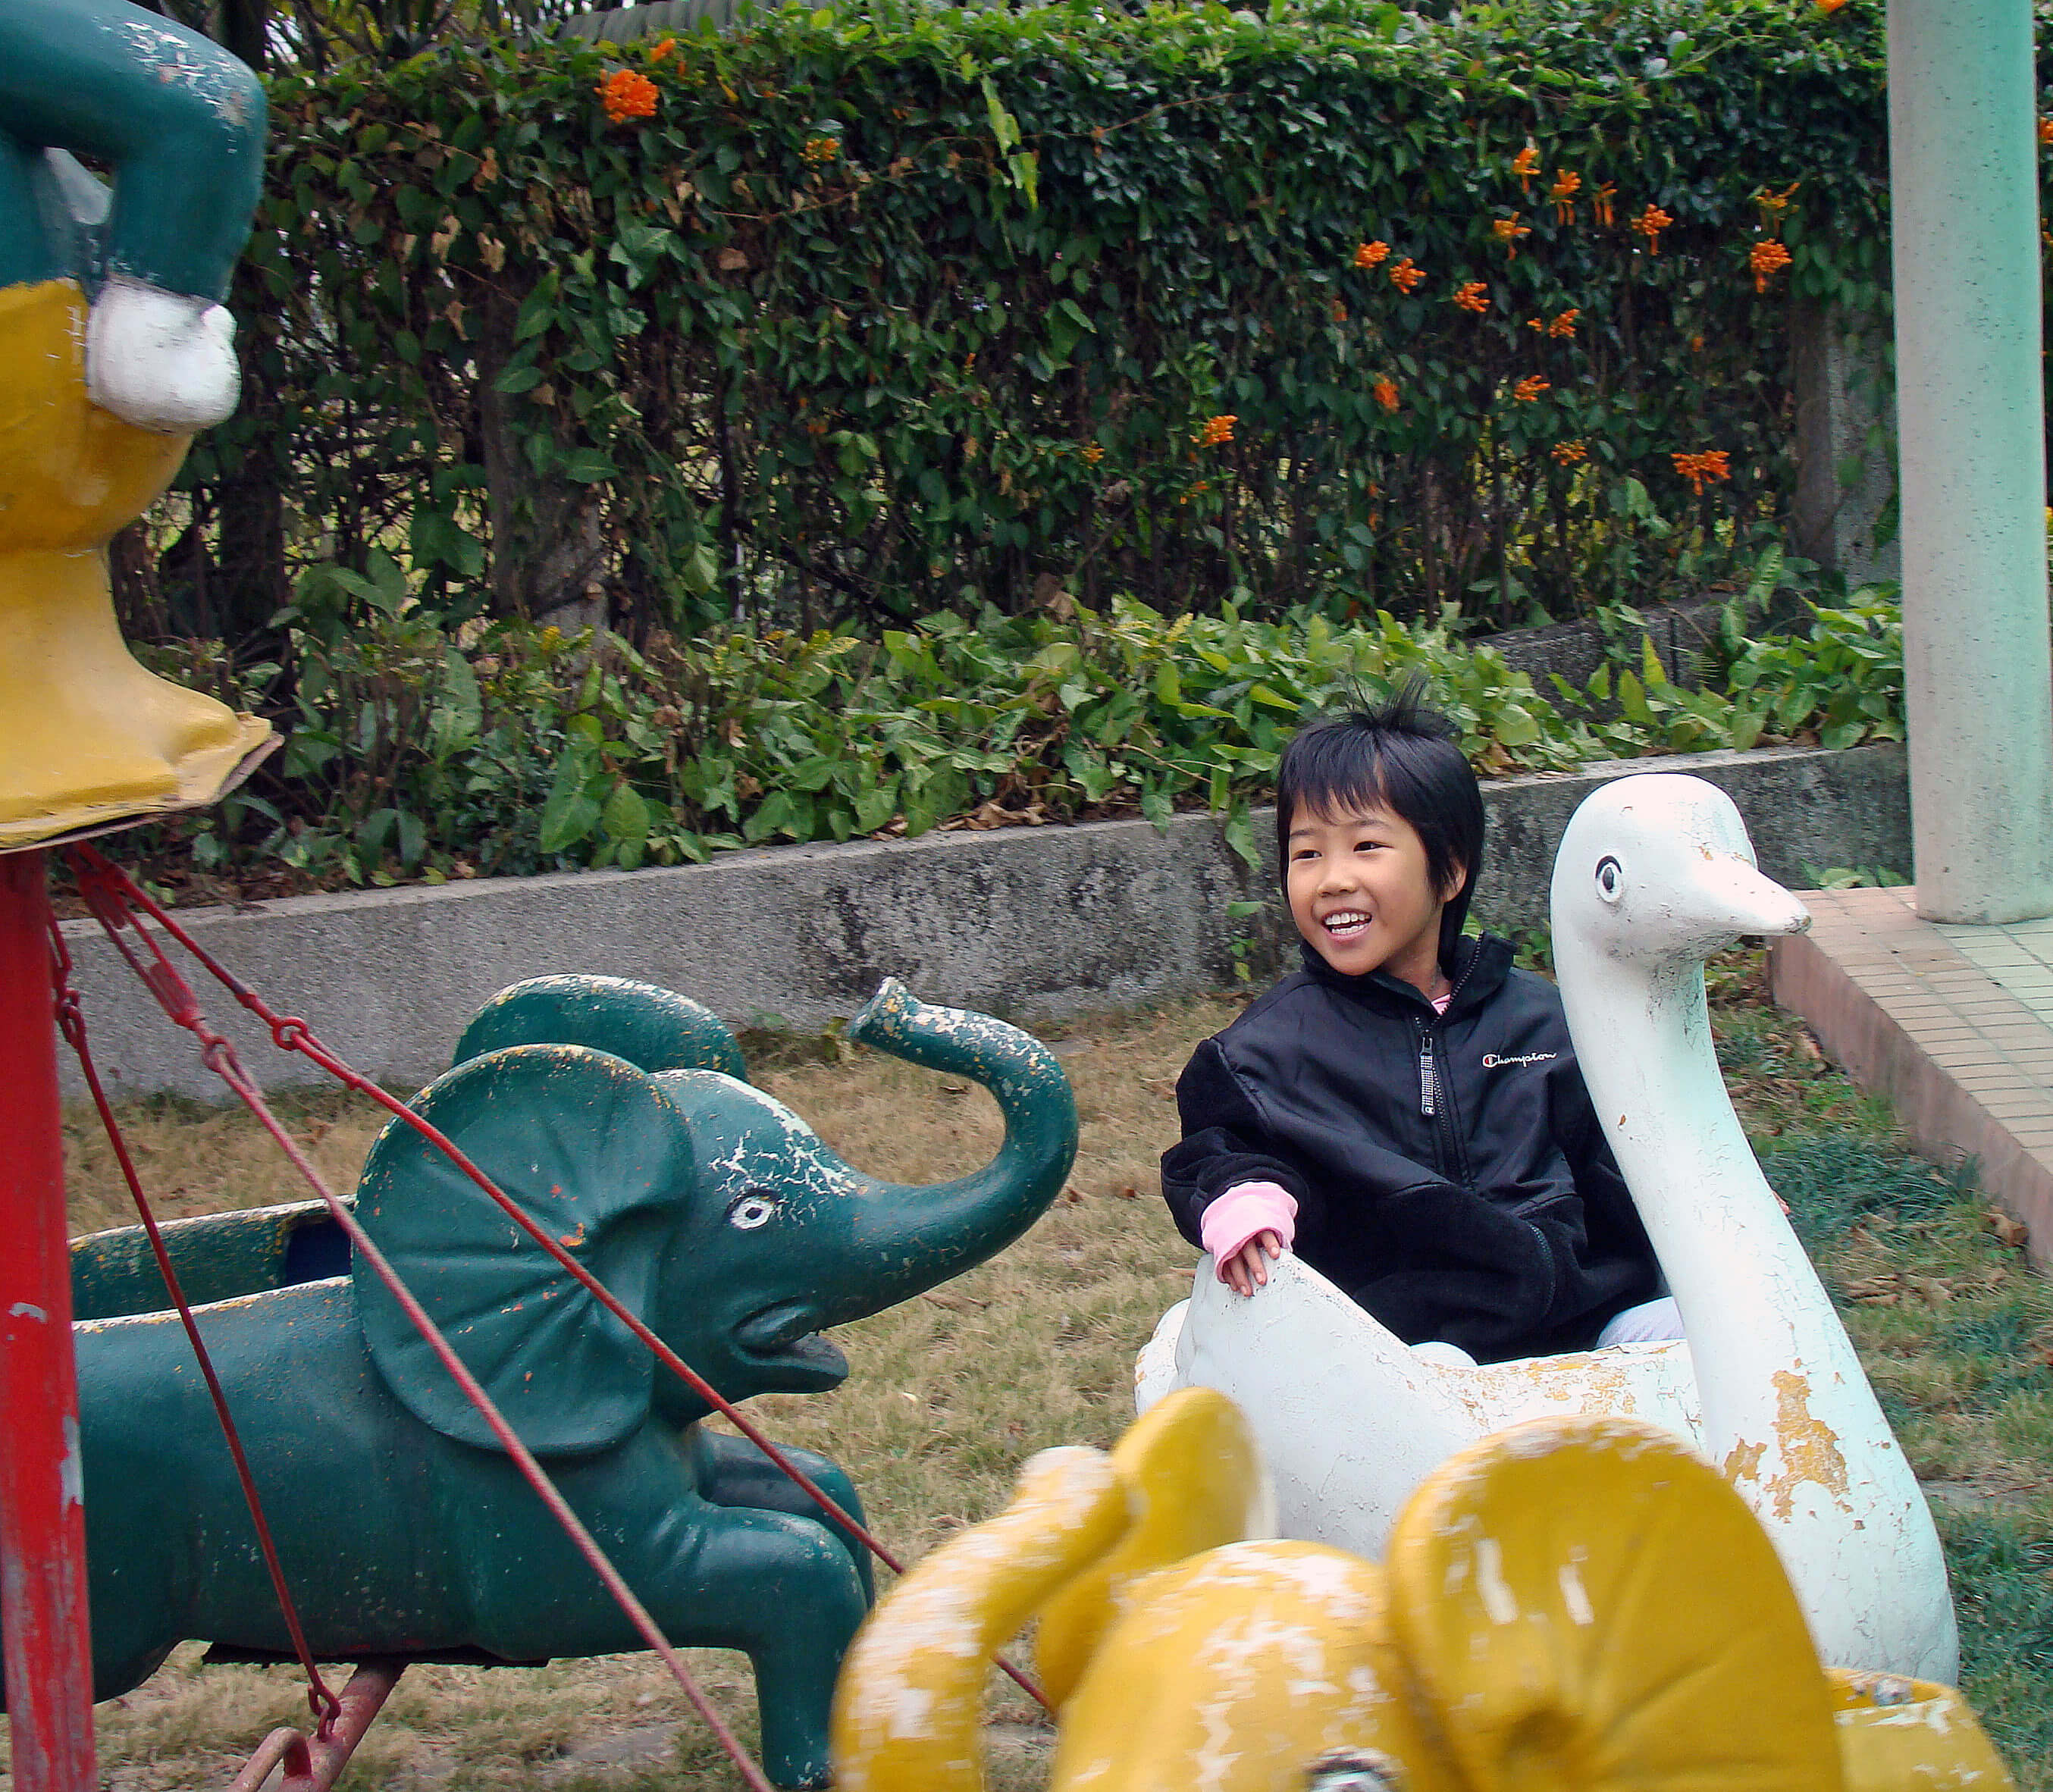 A young child sits in a white swan on a merry-go-round. He has short black hair, is smiling, and wears a black jacket. A bush with orange flowers and green leaves is behind him, and a green elephant and yellow elephant surround him.